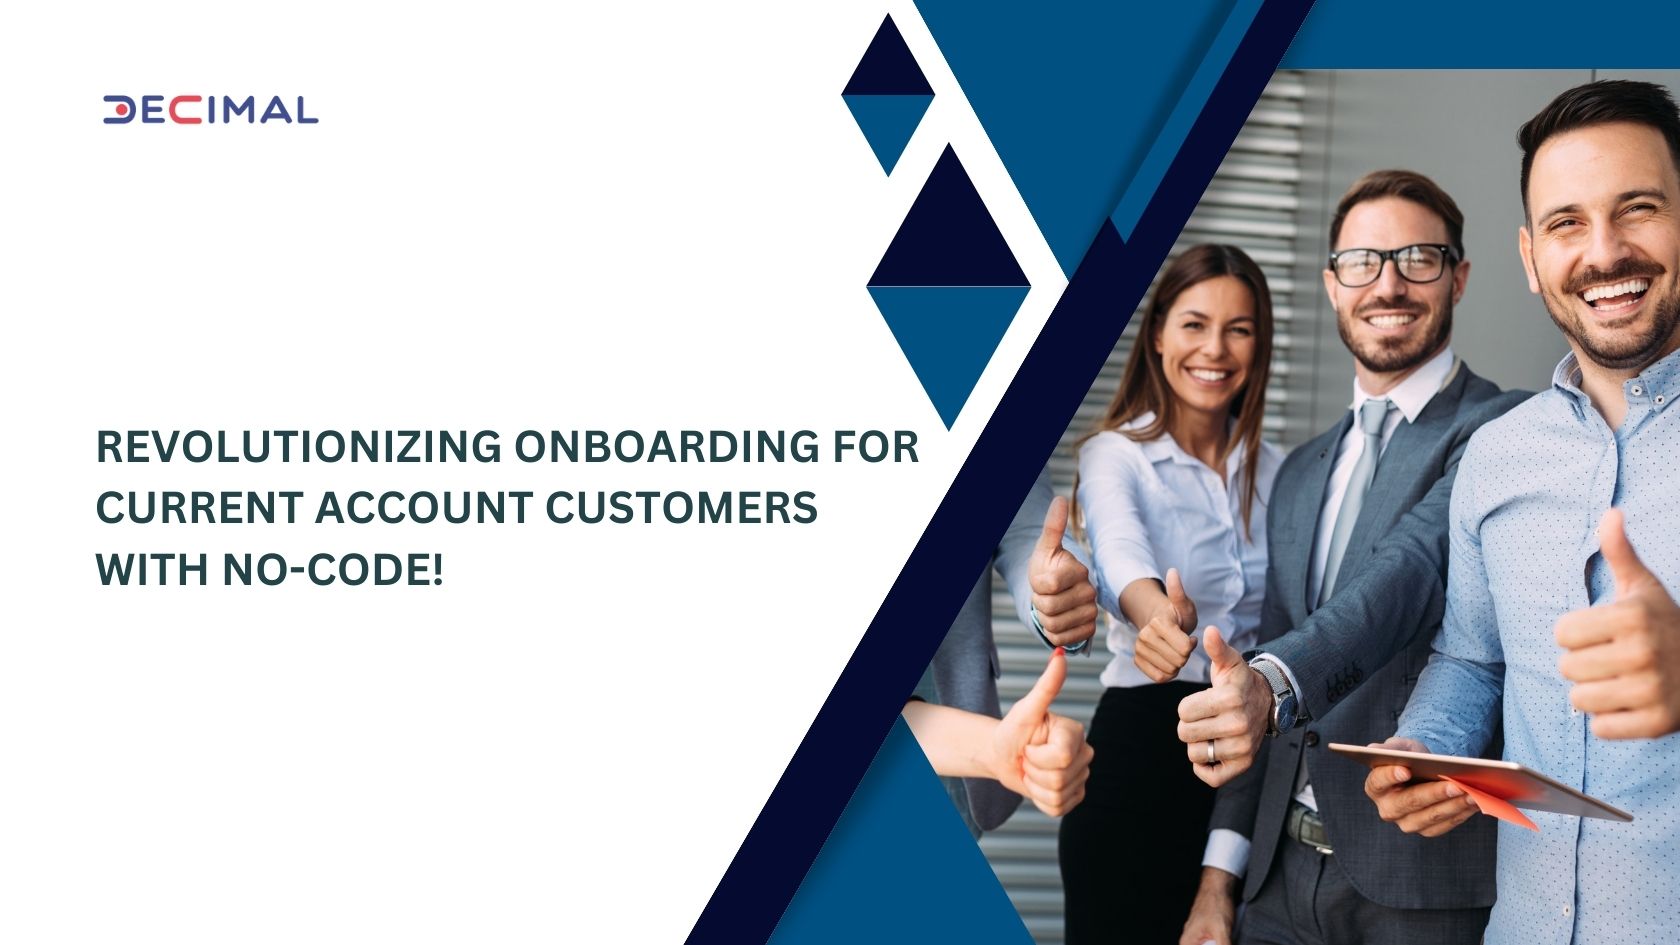 Onboarding Current Account Customers!